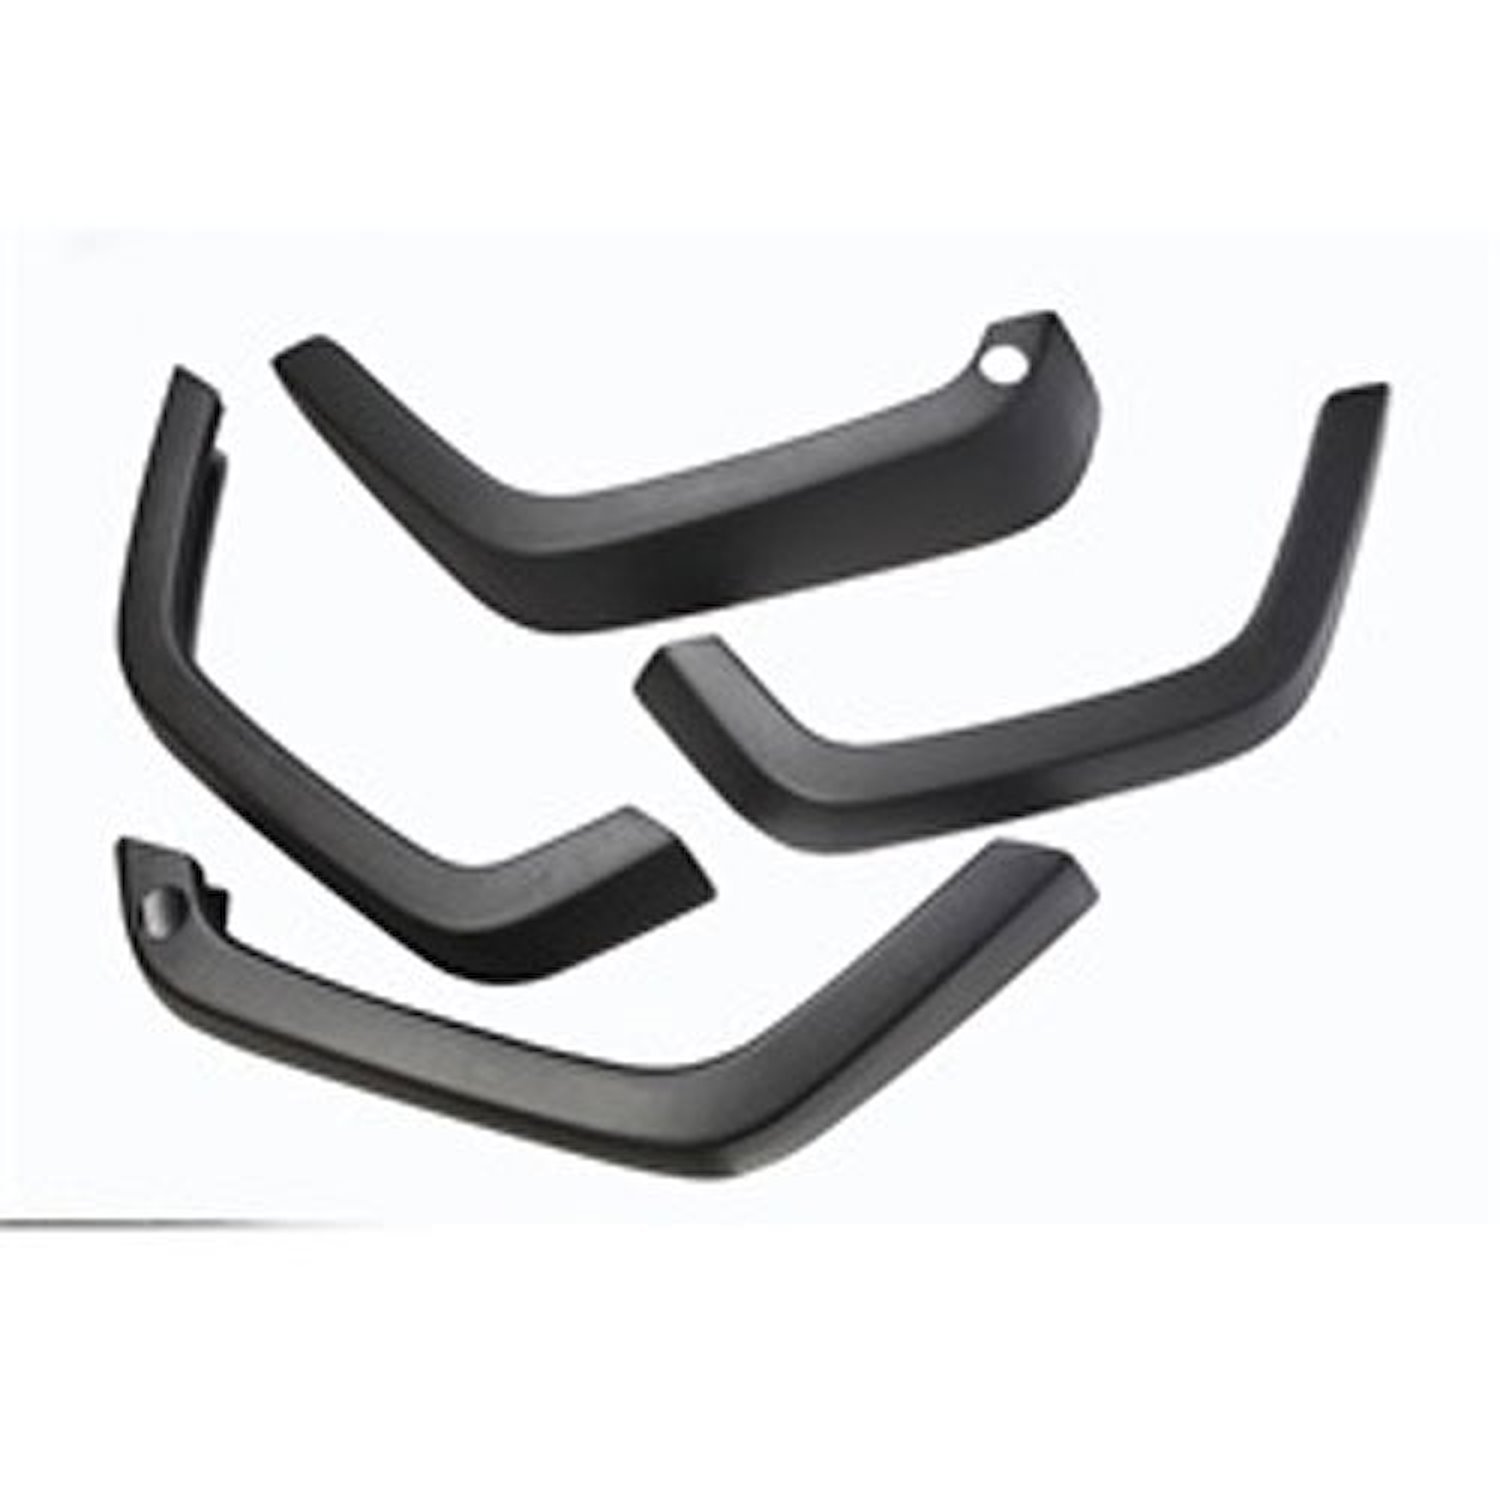 This 4 piece black OE-style fender flare kit from Omix-ADA fits 07-16 Jeep Wrangler. The kit includes attachment hardware.